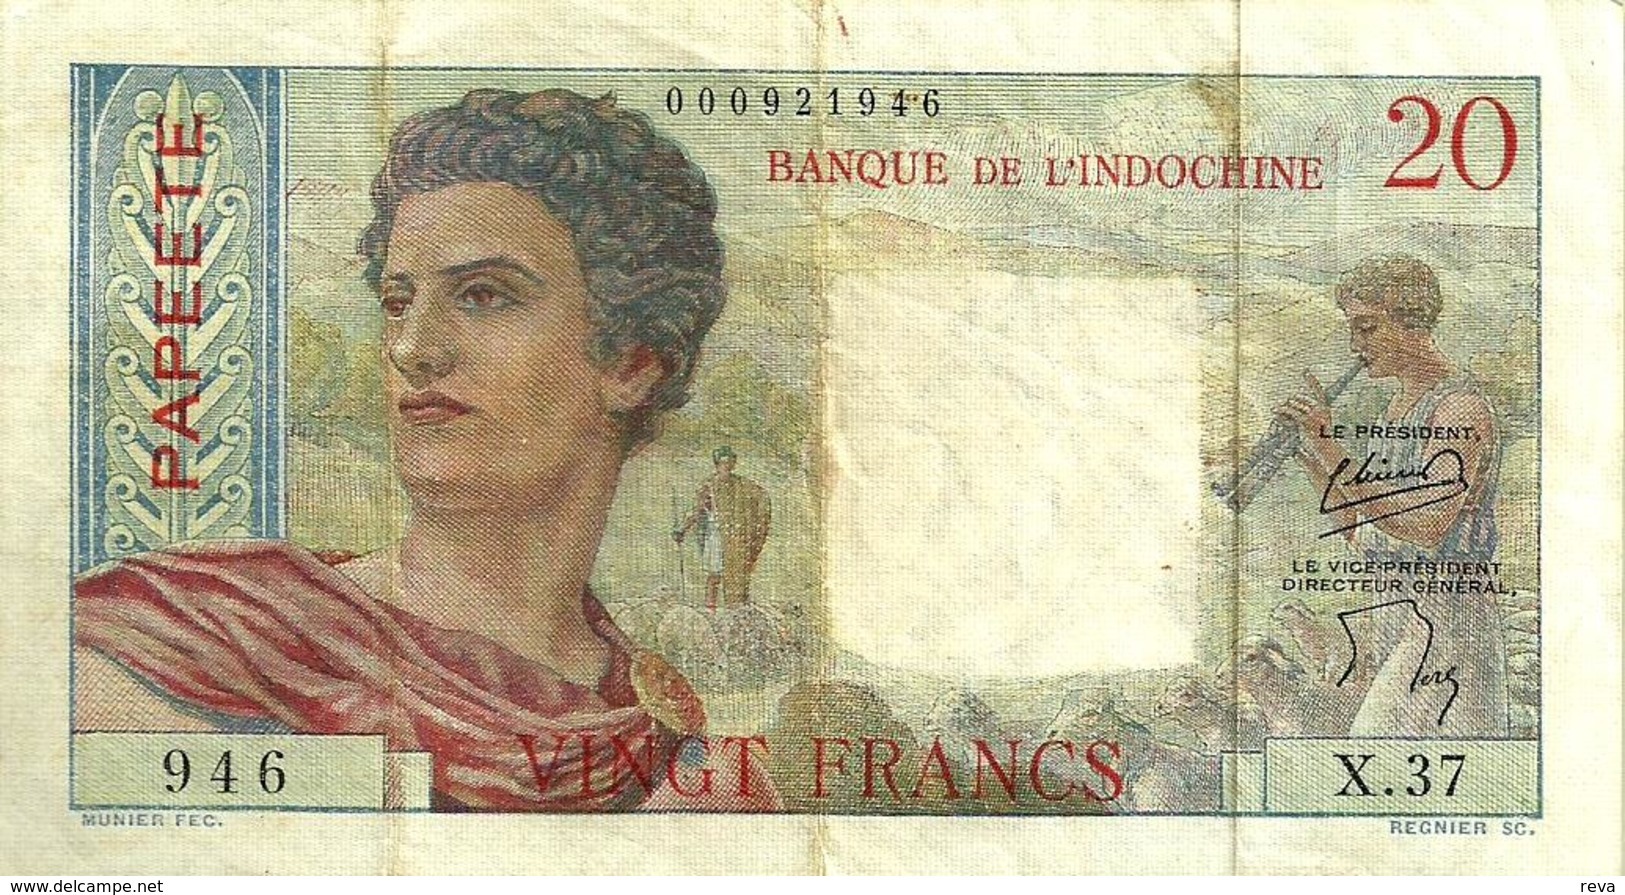 FRENCH POLYNESIA 20 FRANCS GREY MAN HEAD FRONT WOMAN BACK NOT DATED(1951) P21a 1ST SIG VARIETY F READ DESCRIPTION!! - Papeete (Polynésie Française 1914-1985)